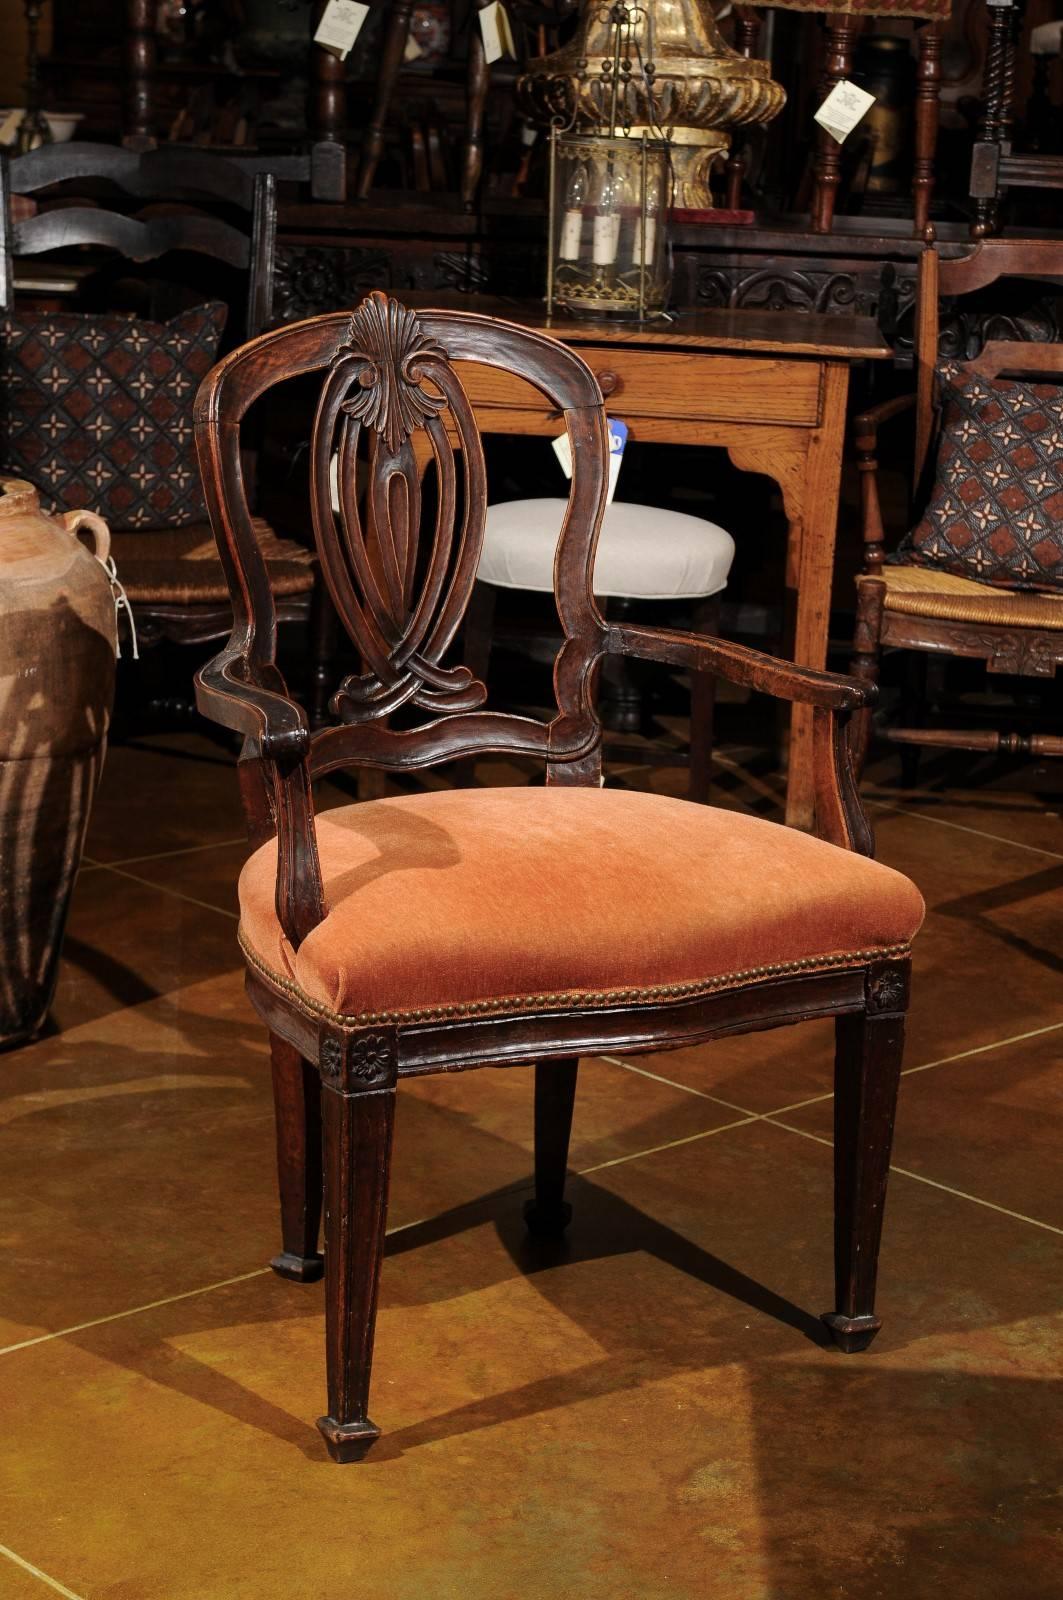 Italian walnut arm chair transitioning from Rococo to neoclassical styles on tapered legs, circa 1780.